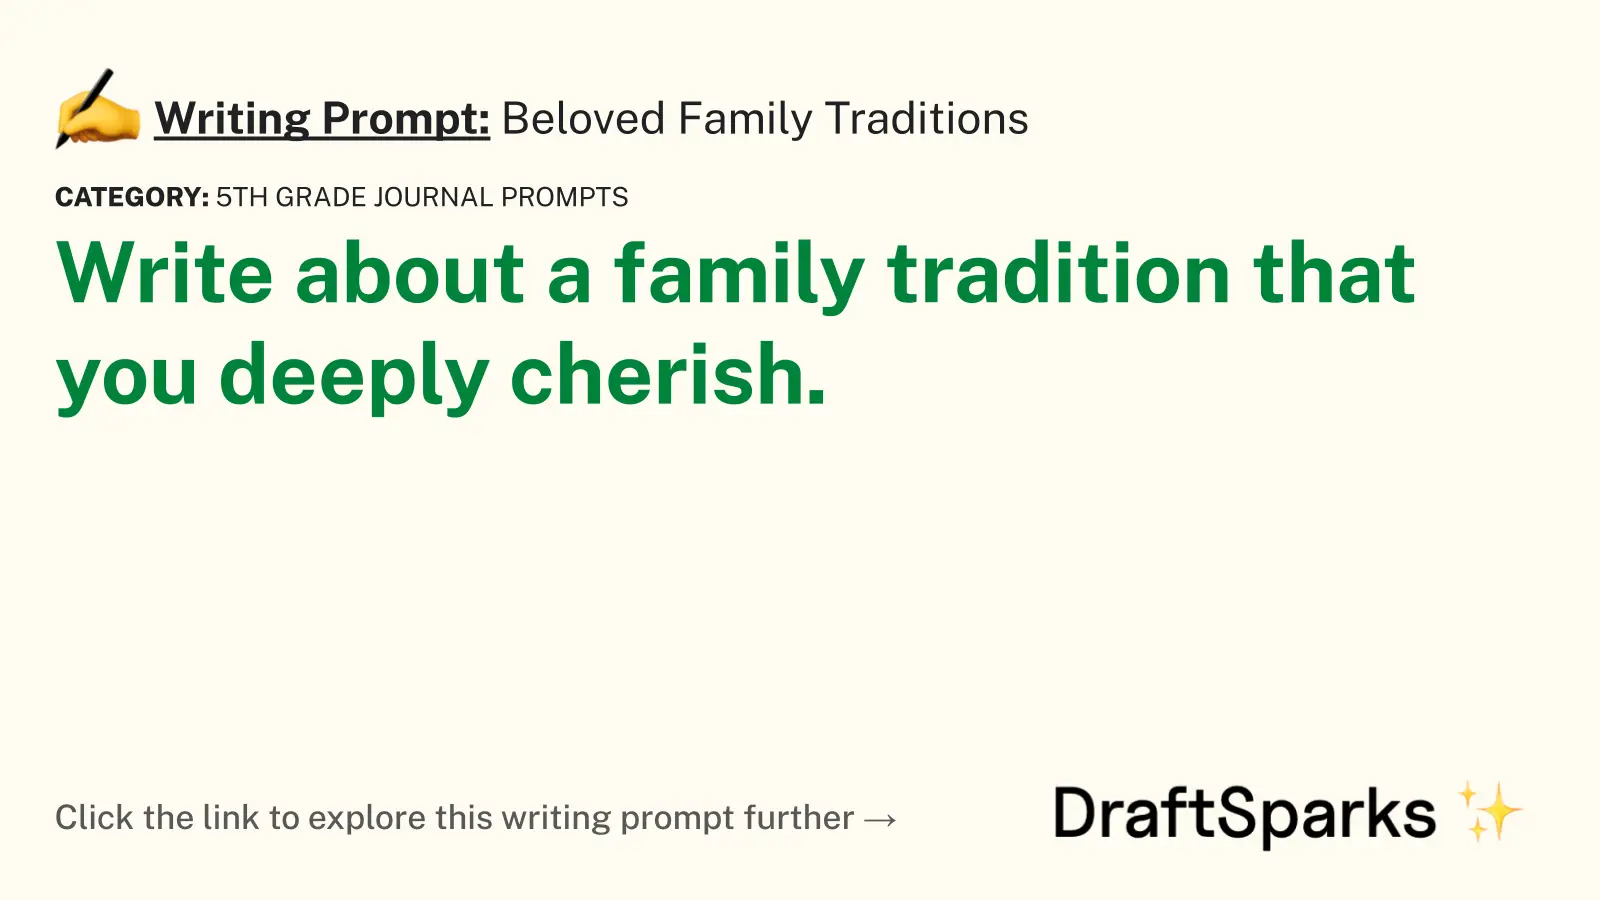 Beloved Family Traditions